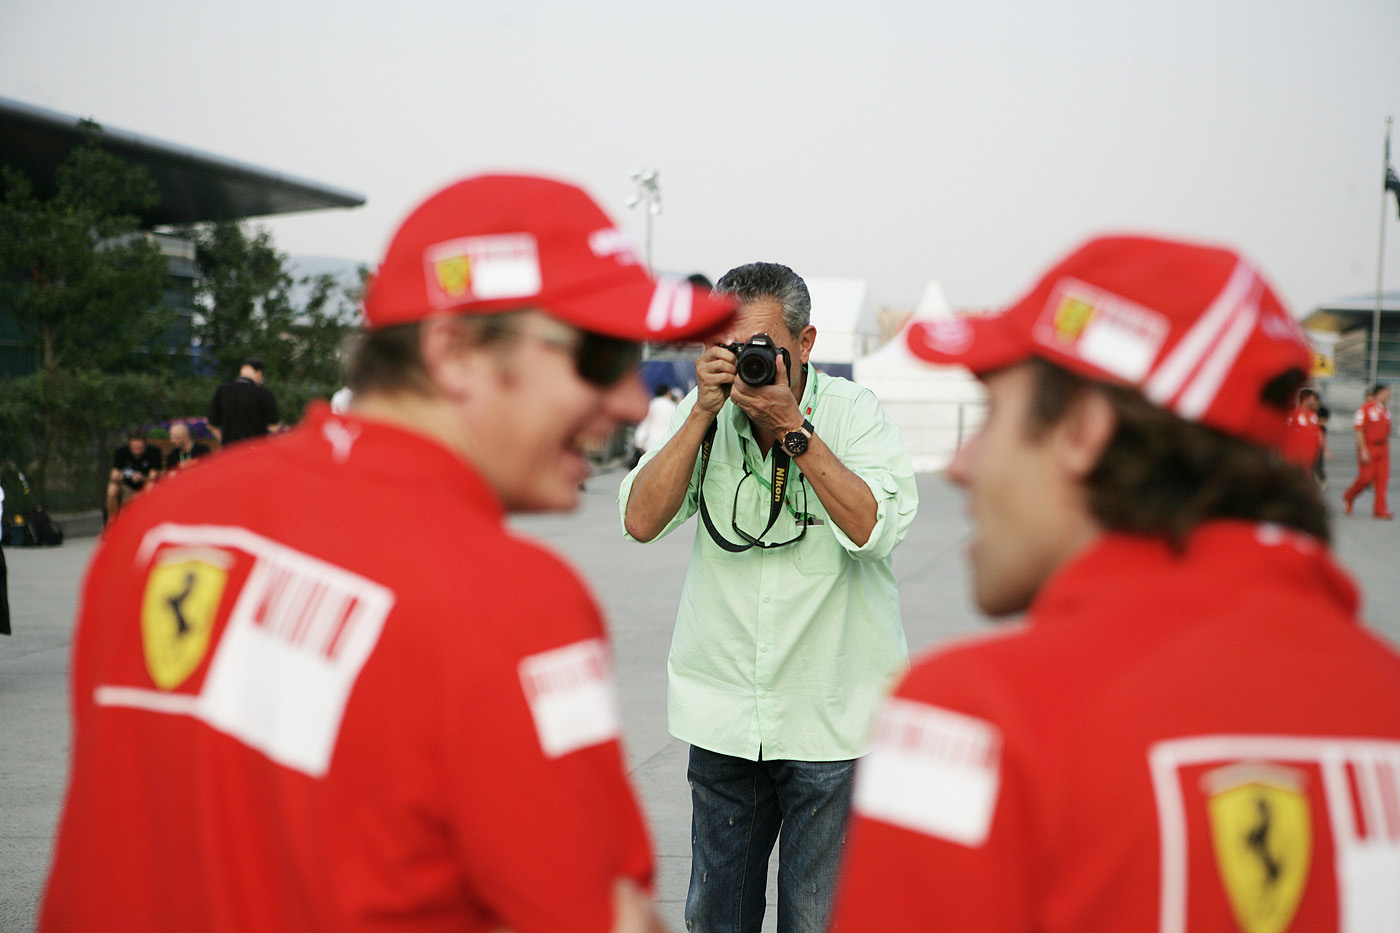 Somewhere in the world, someone has a great photo of me, taking a photo of the back of Kimi Räikkönen's head